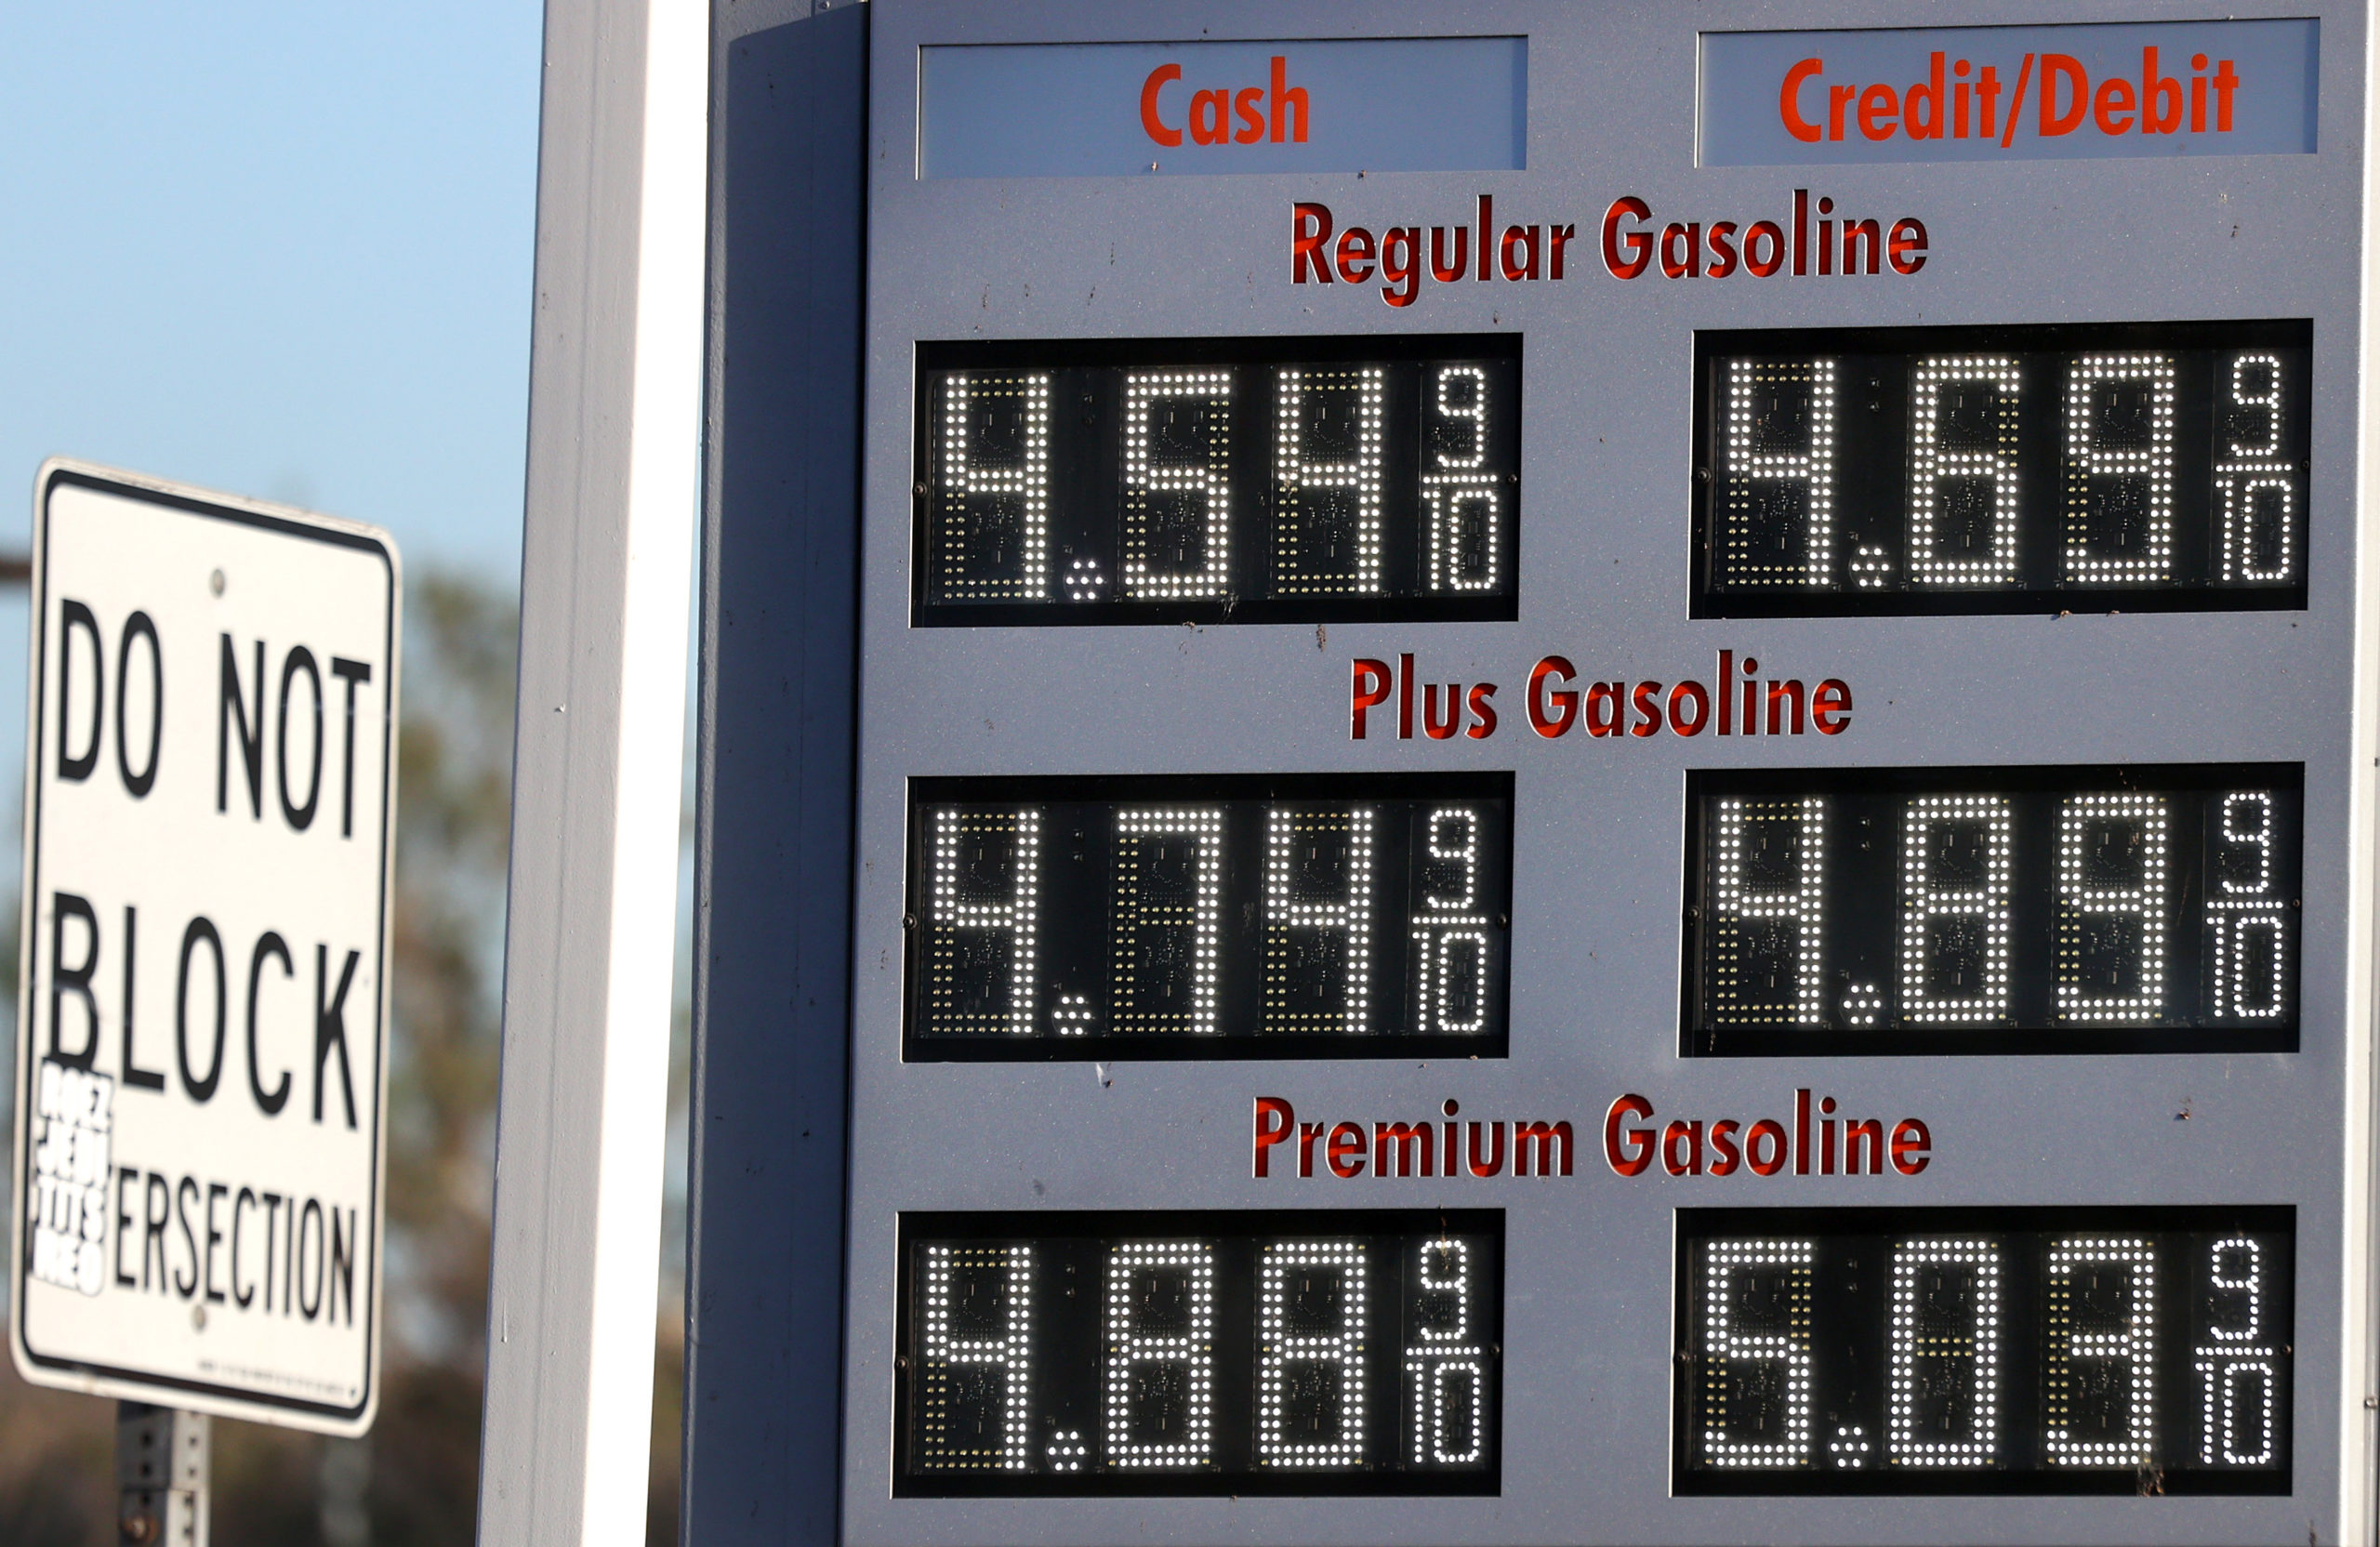 LOS ANGELES, CALIFORNIA - NOVEMBER 23: Gasoline prices are displayed outside a gas station on November 23, 2021 in Los Angeles, California. President Biden announced a plan to release oil from the Strategic Petroleum Reserve in an effort to curb high gas prices. (Photo by Mario Tama/Getty Images)